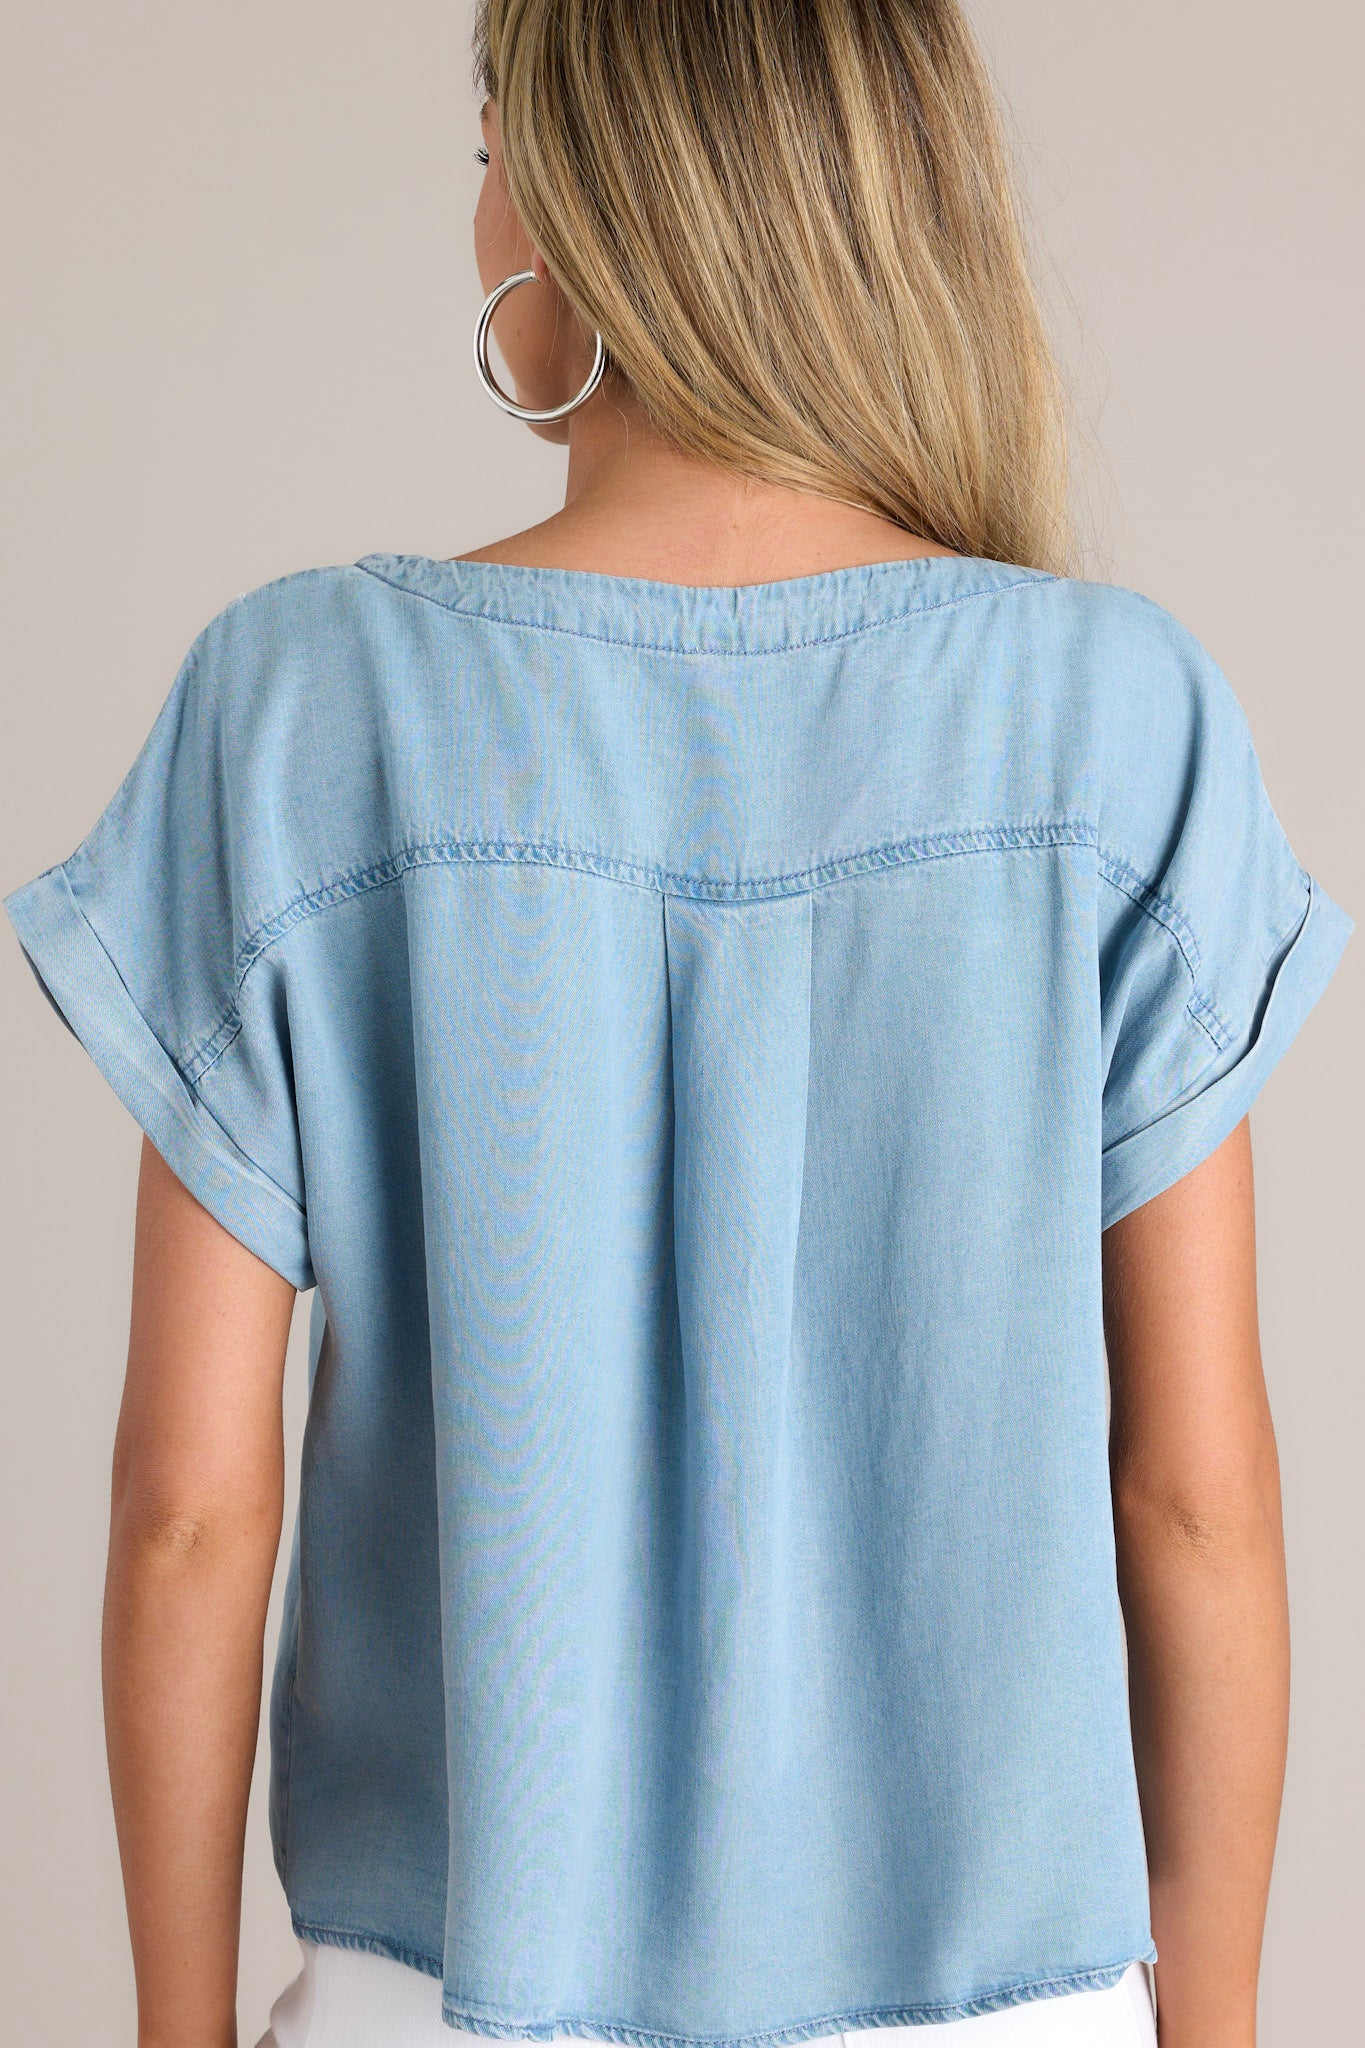 Back view of this light chambray top that features a crew neckline, a relaxed fit, and a wide cuffed short sleeves.